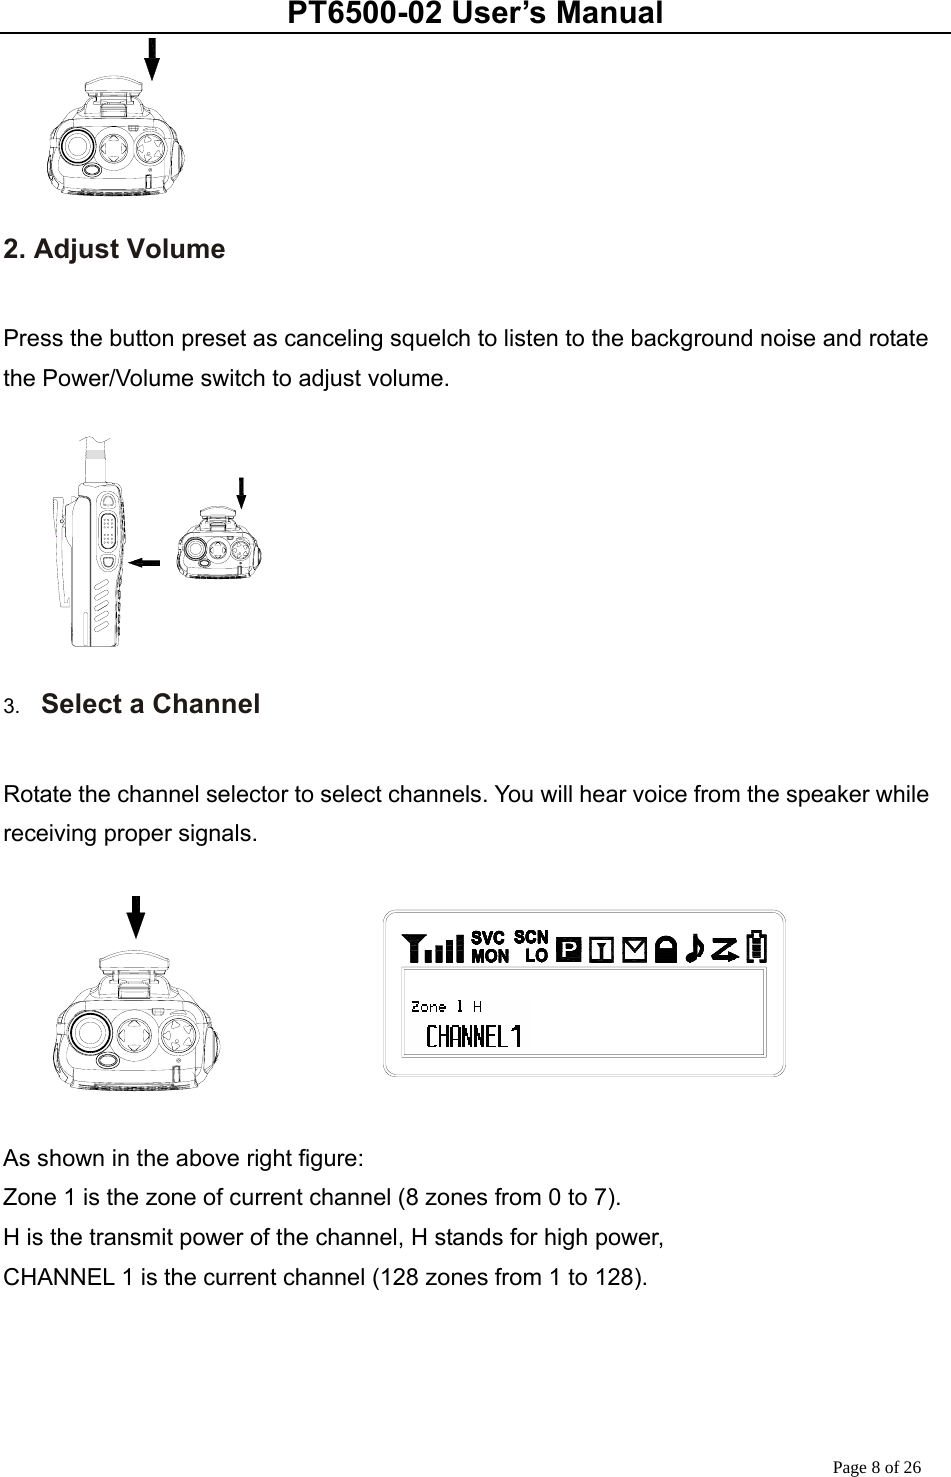 PT6500-02 User’s Manual Page 8 of 26  2. Adjust Volume  Press the button preset as canceling squelch to listen to the background noise and rotate the Power/Volume switch to adjust volume.   3.  Select a Channel  Rotate the channel selector to select channels. You will hear voice from the speaker while receiving proper signals.    As shown in the above right figure: Zone 1 is the zone of current channel (8 zones from 0 to 7). H is the transmit power of the channel, H stands for high power,   CHANNEL 1 is the current channel (128 zones from 1 to 128).       